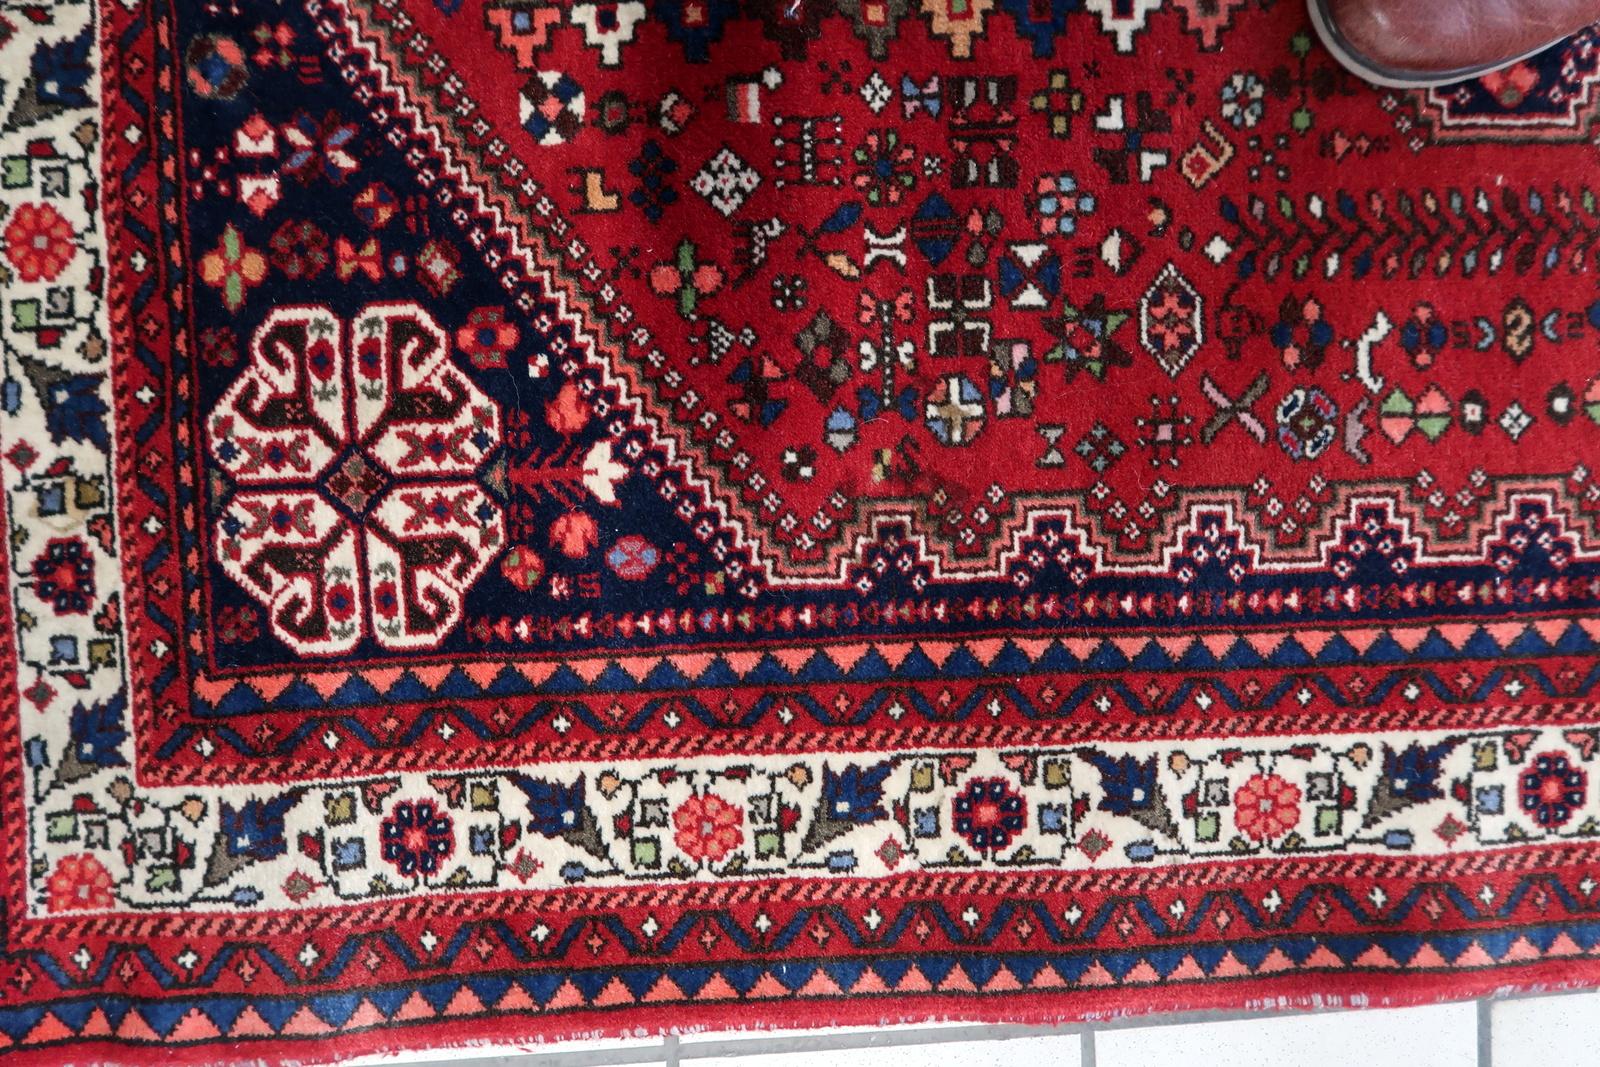 Late 20th Century Handmade Vintage Persian Malayer Rug 3.4' x 4.9' (106cm x 151cm), 1970s - 1C1111 For Sale